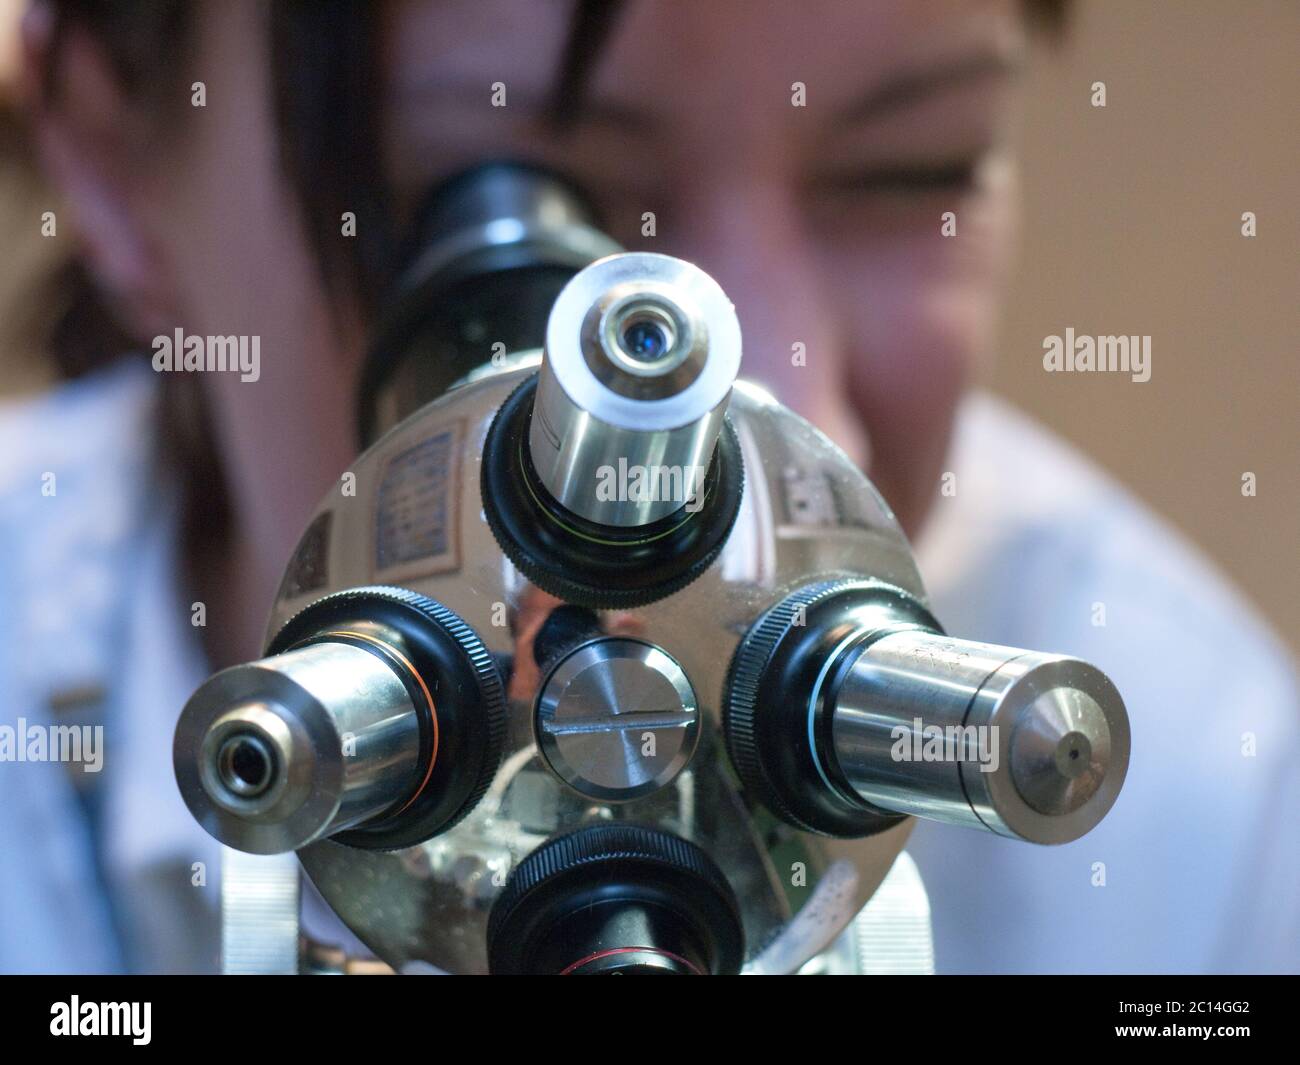 Young woman looks through a microscope. Photo taken from below with focus on the four lenses Stock Photo